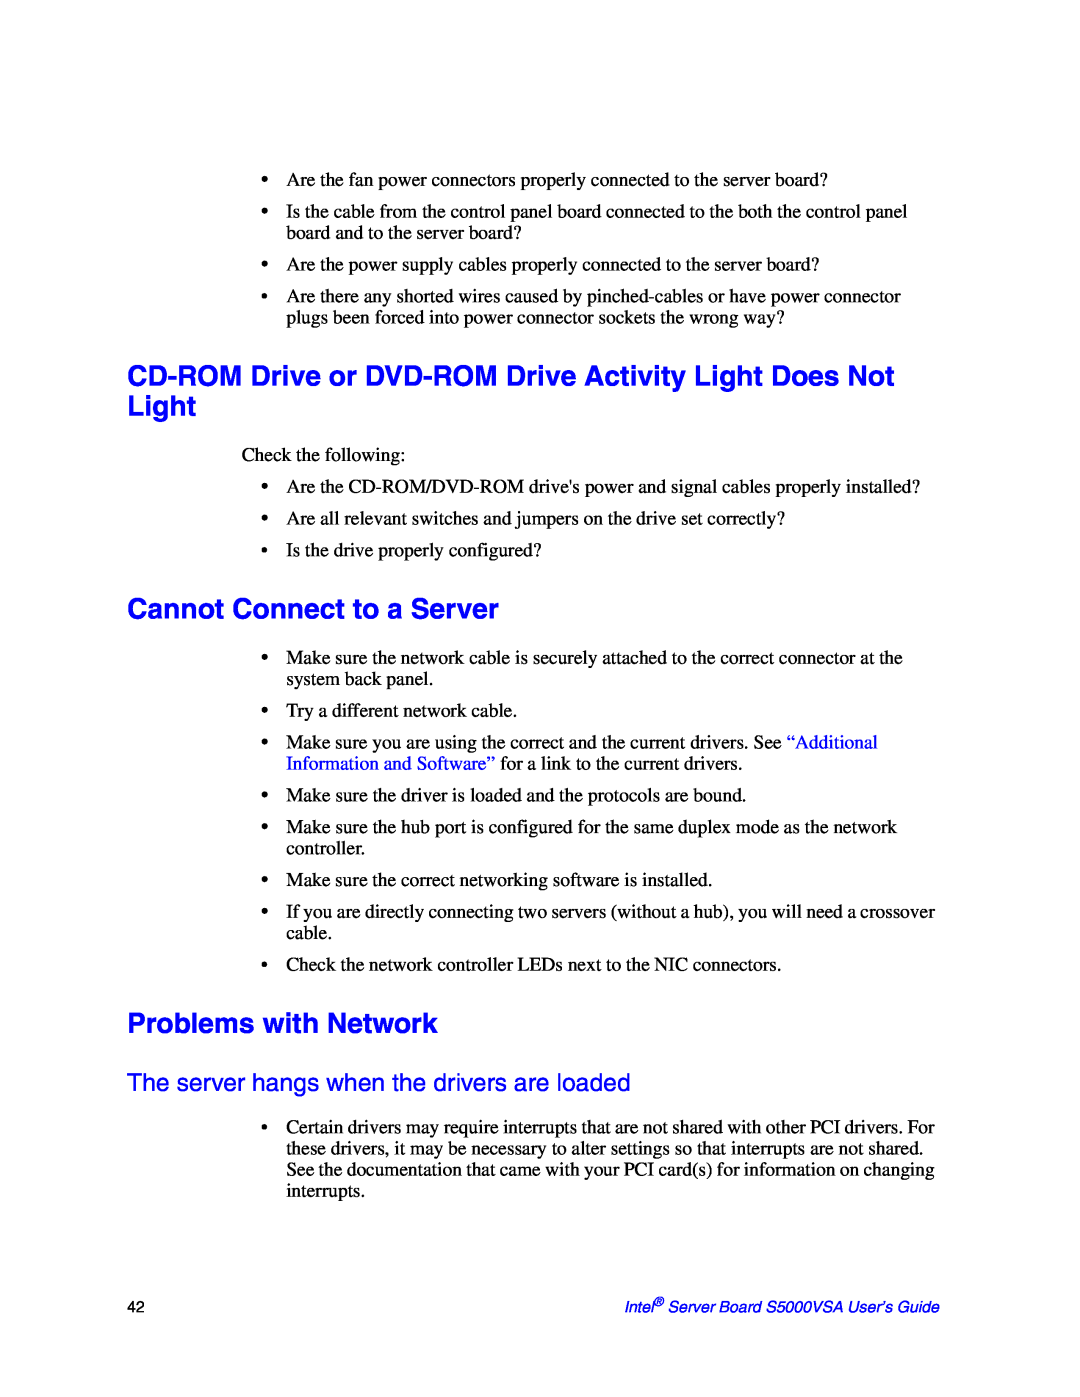 Intel S5000VSA manual CD-ROM Drive or DVD-ROM Drive Activity Light Does Not Light, Cannot Connect to a Server 